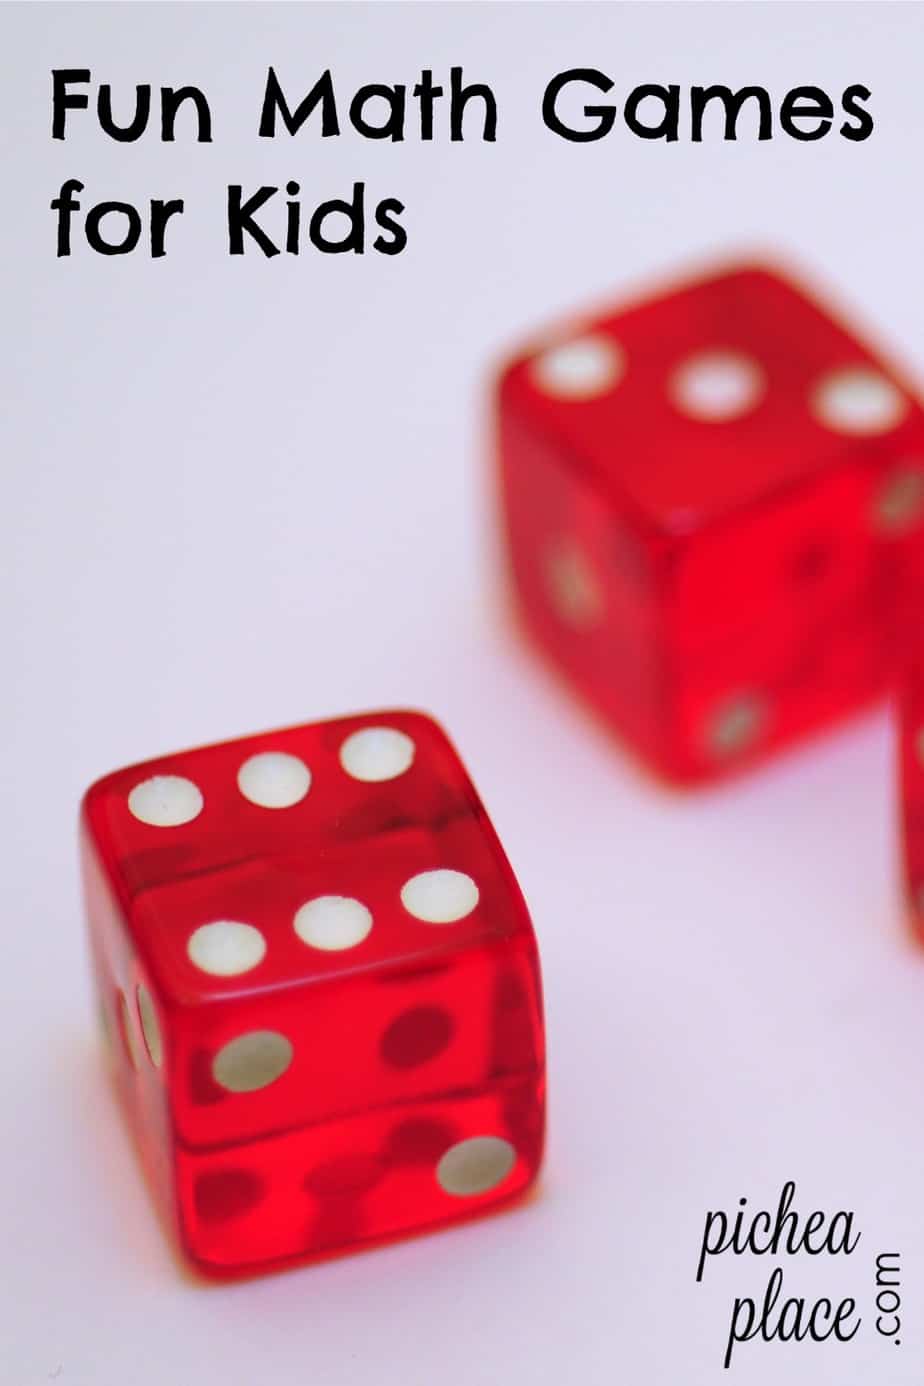 Math Kids: Math Games For Kids download the last version for ipod